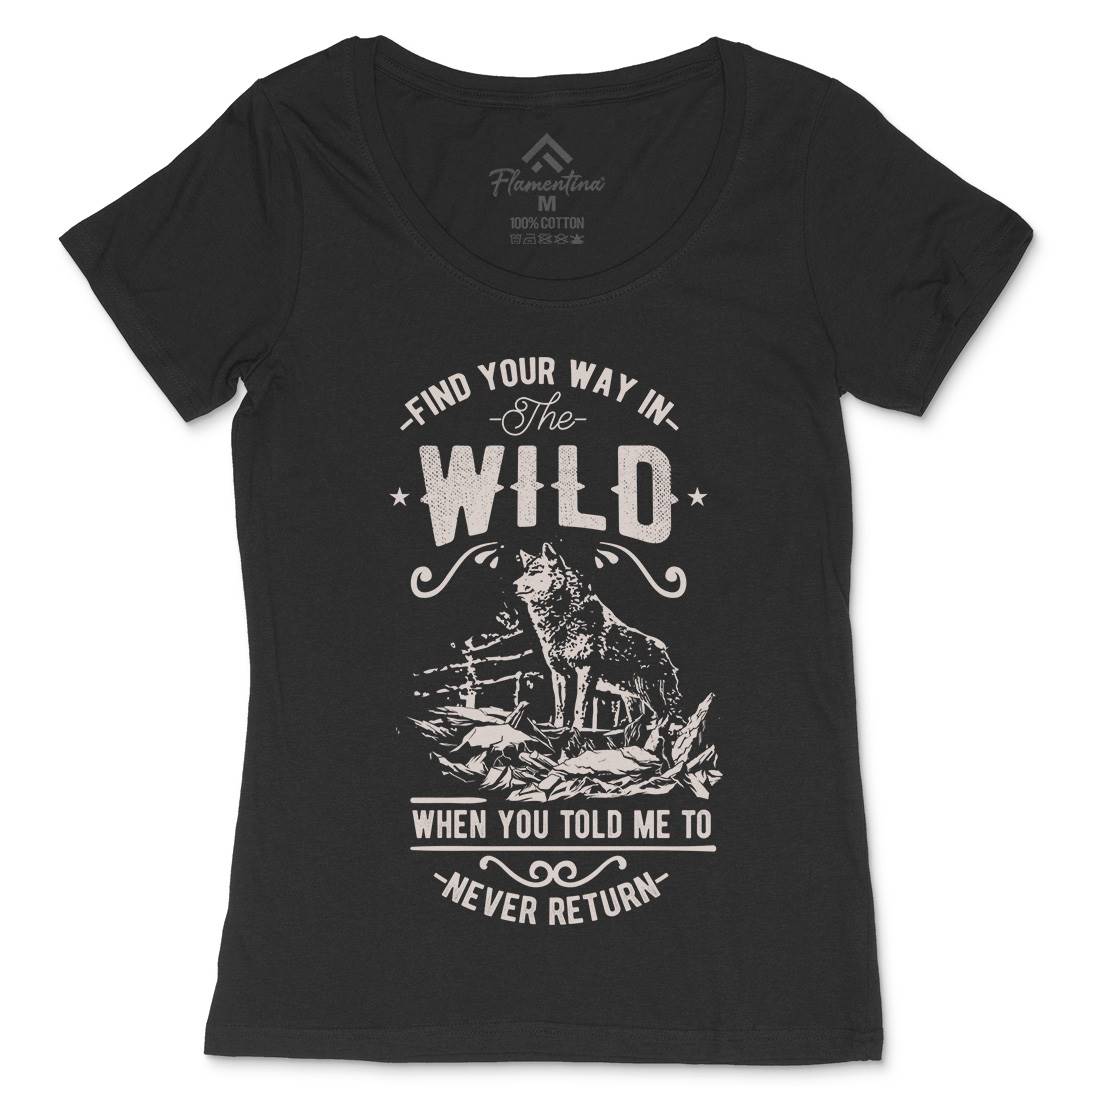 Find Your Way In The Wild Womens Scoop Neck T-Shirt Nature C932